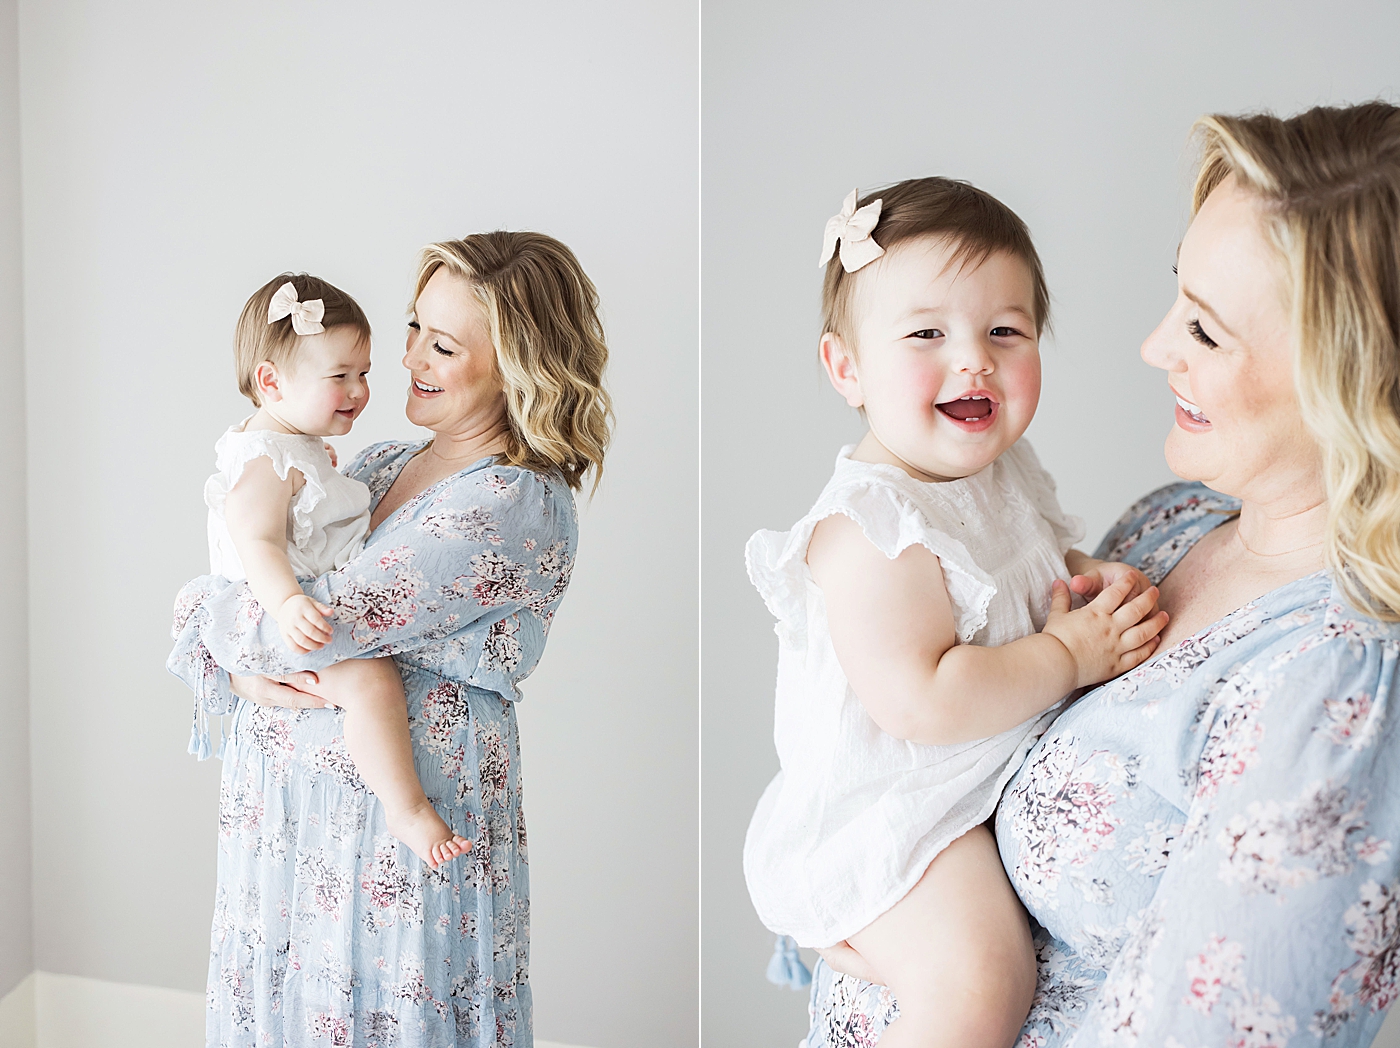 Mom holding her daughter during maternity session for second baby. Photo by Fresh Light Photography.